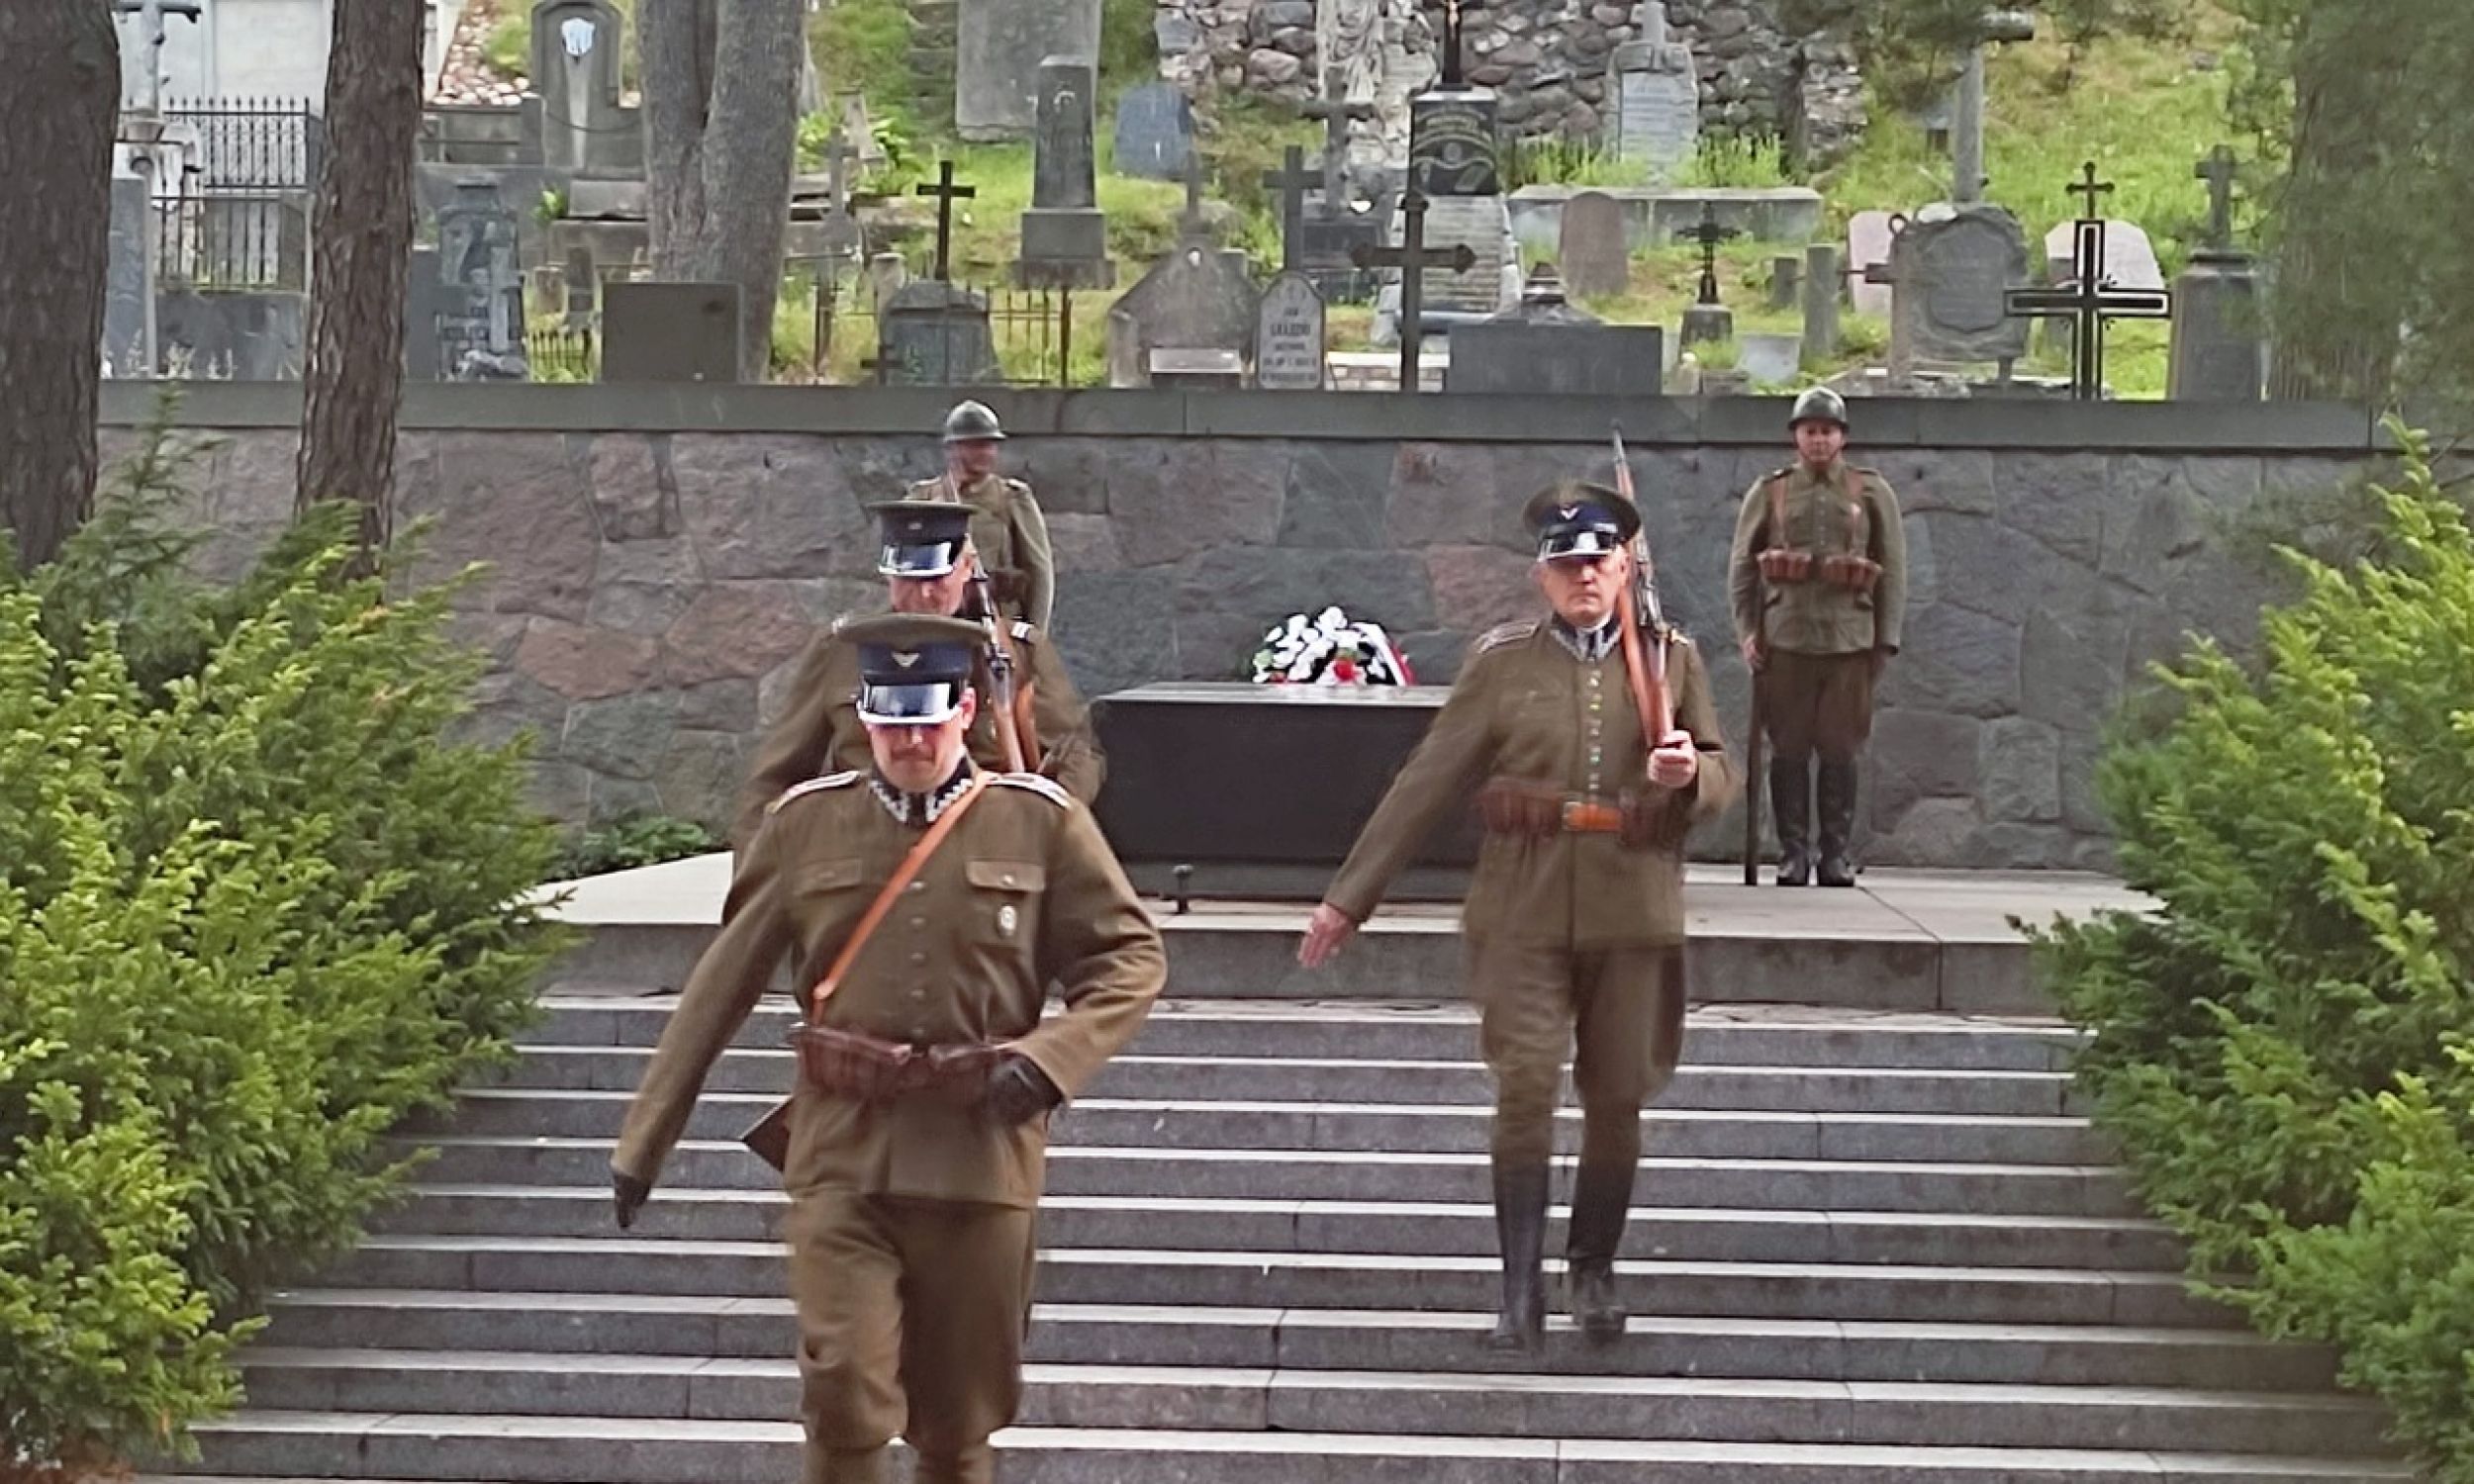 Changing of the guard at the Mausoleum of the Mother and the Heart of Her Son, which contains the remains of Józef Piłsudski’s mother, Maria, and his own heart. Rasos Cemetery